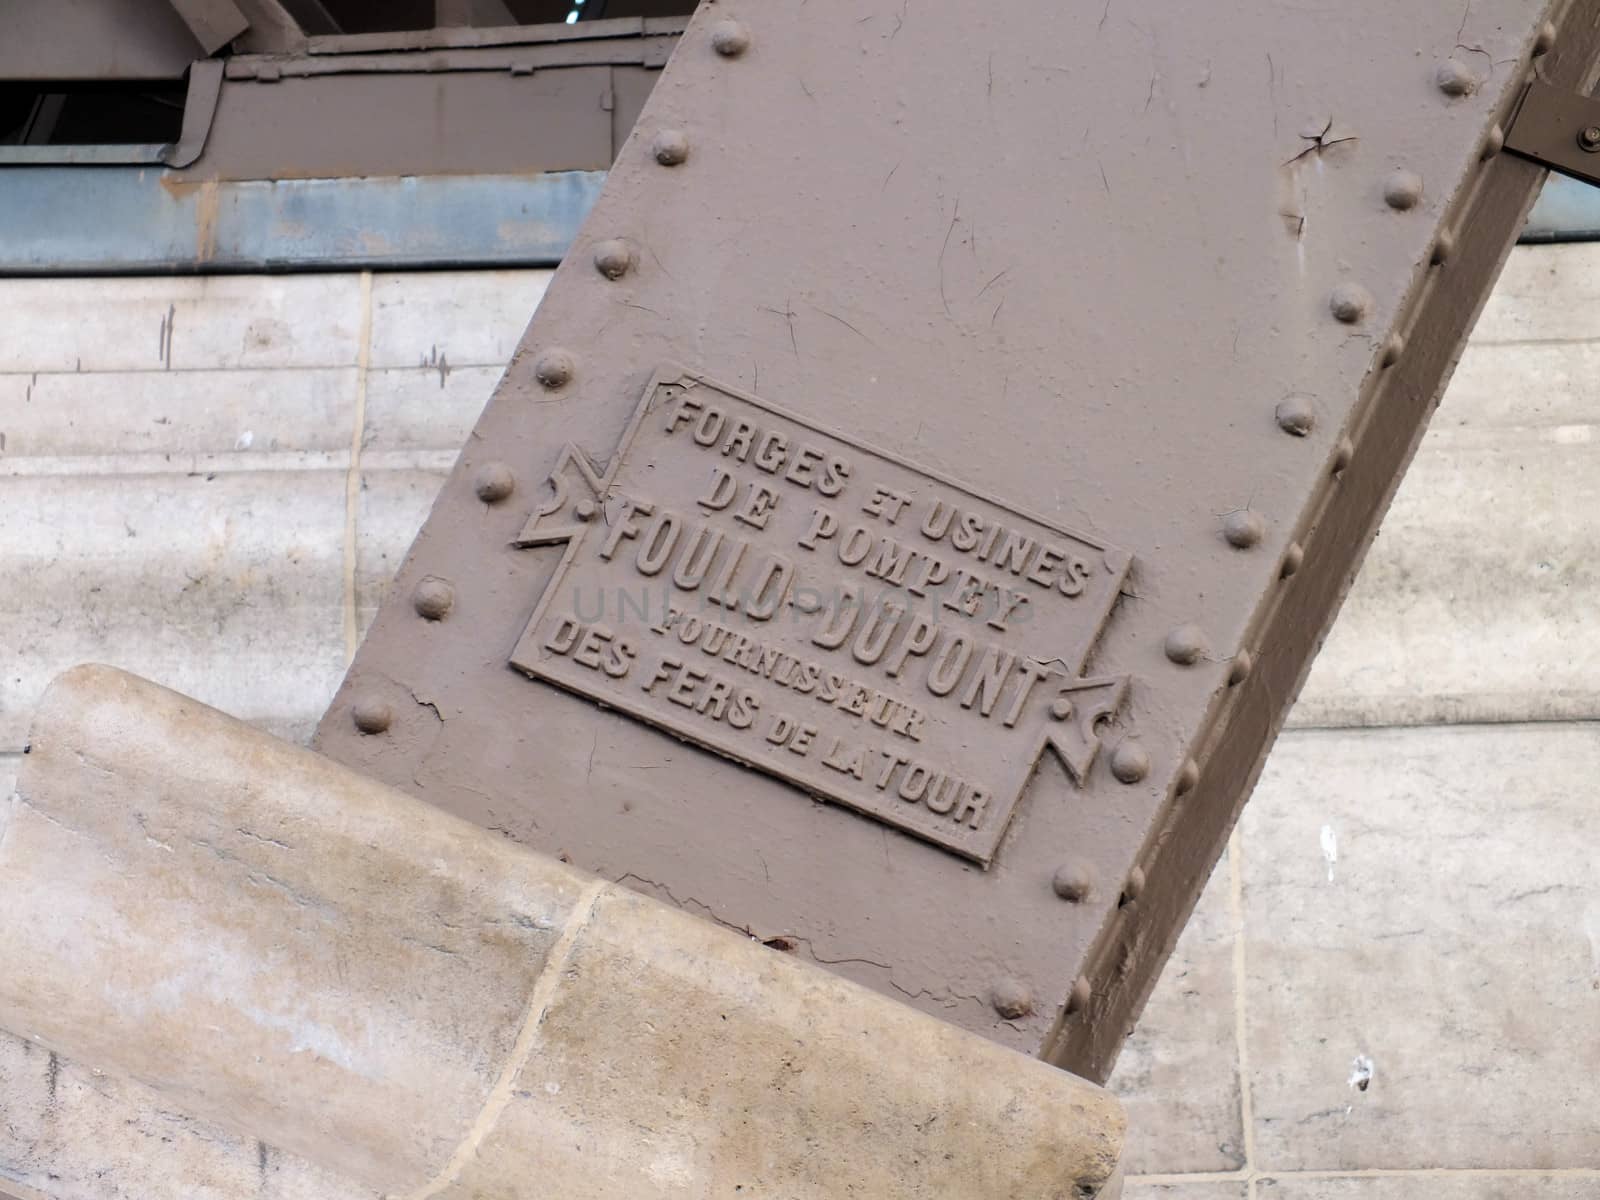 The maker's plate fixed to one of the tower legs refers to the fact that the wrought iron steel was produced at the Fould-Dupoont steelworks in Pompey, eastern France.